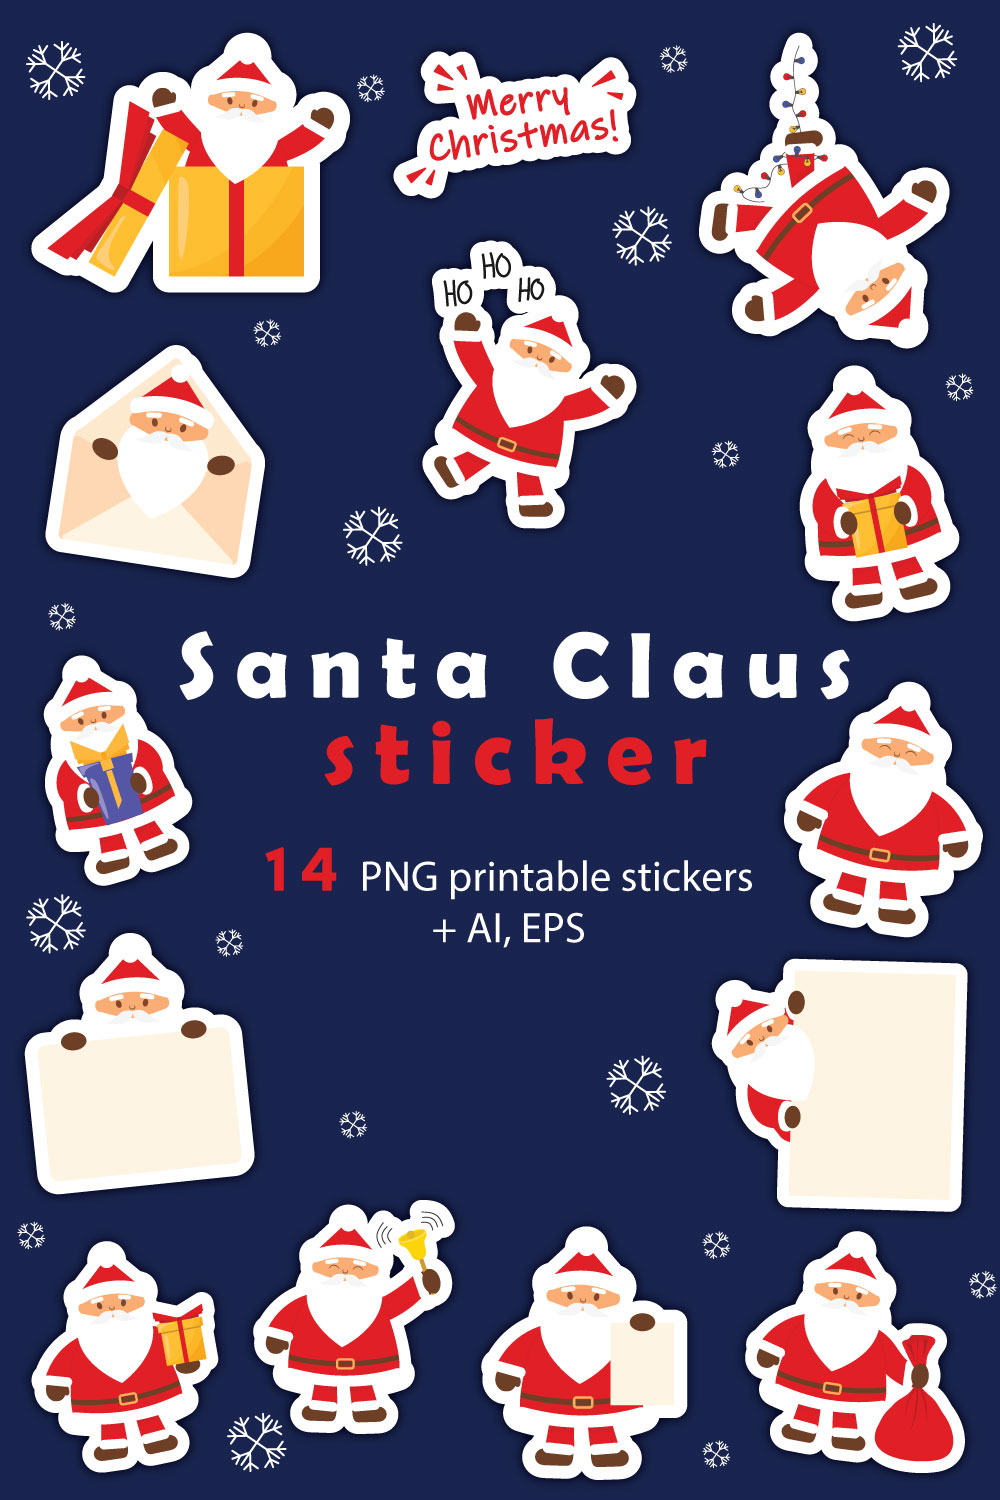 Collection of colorful images of cute santa stickers